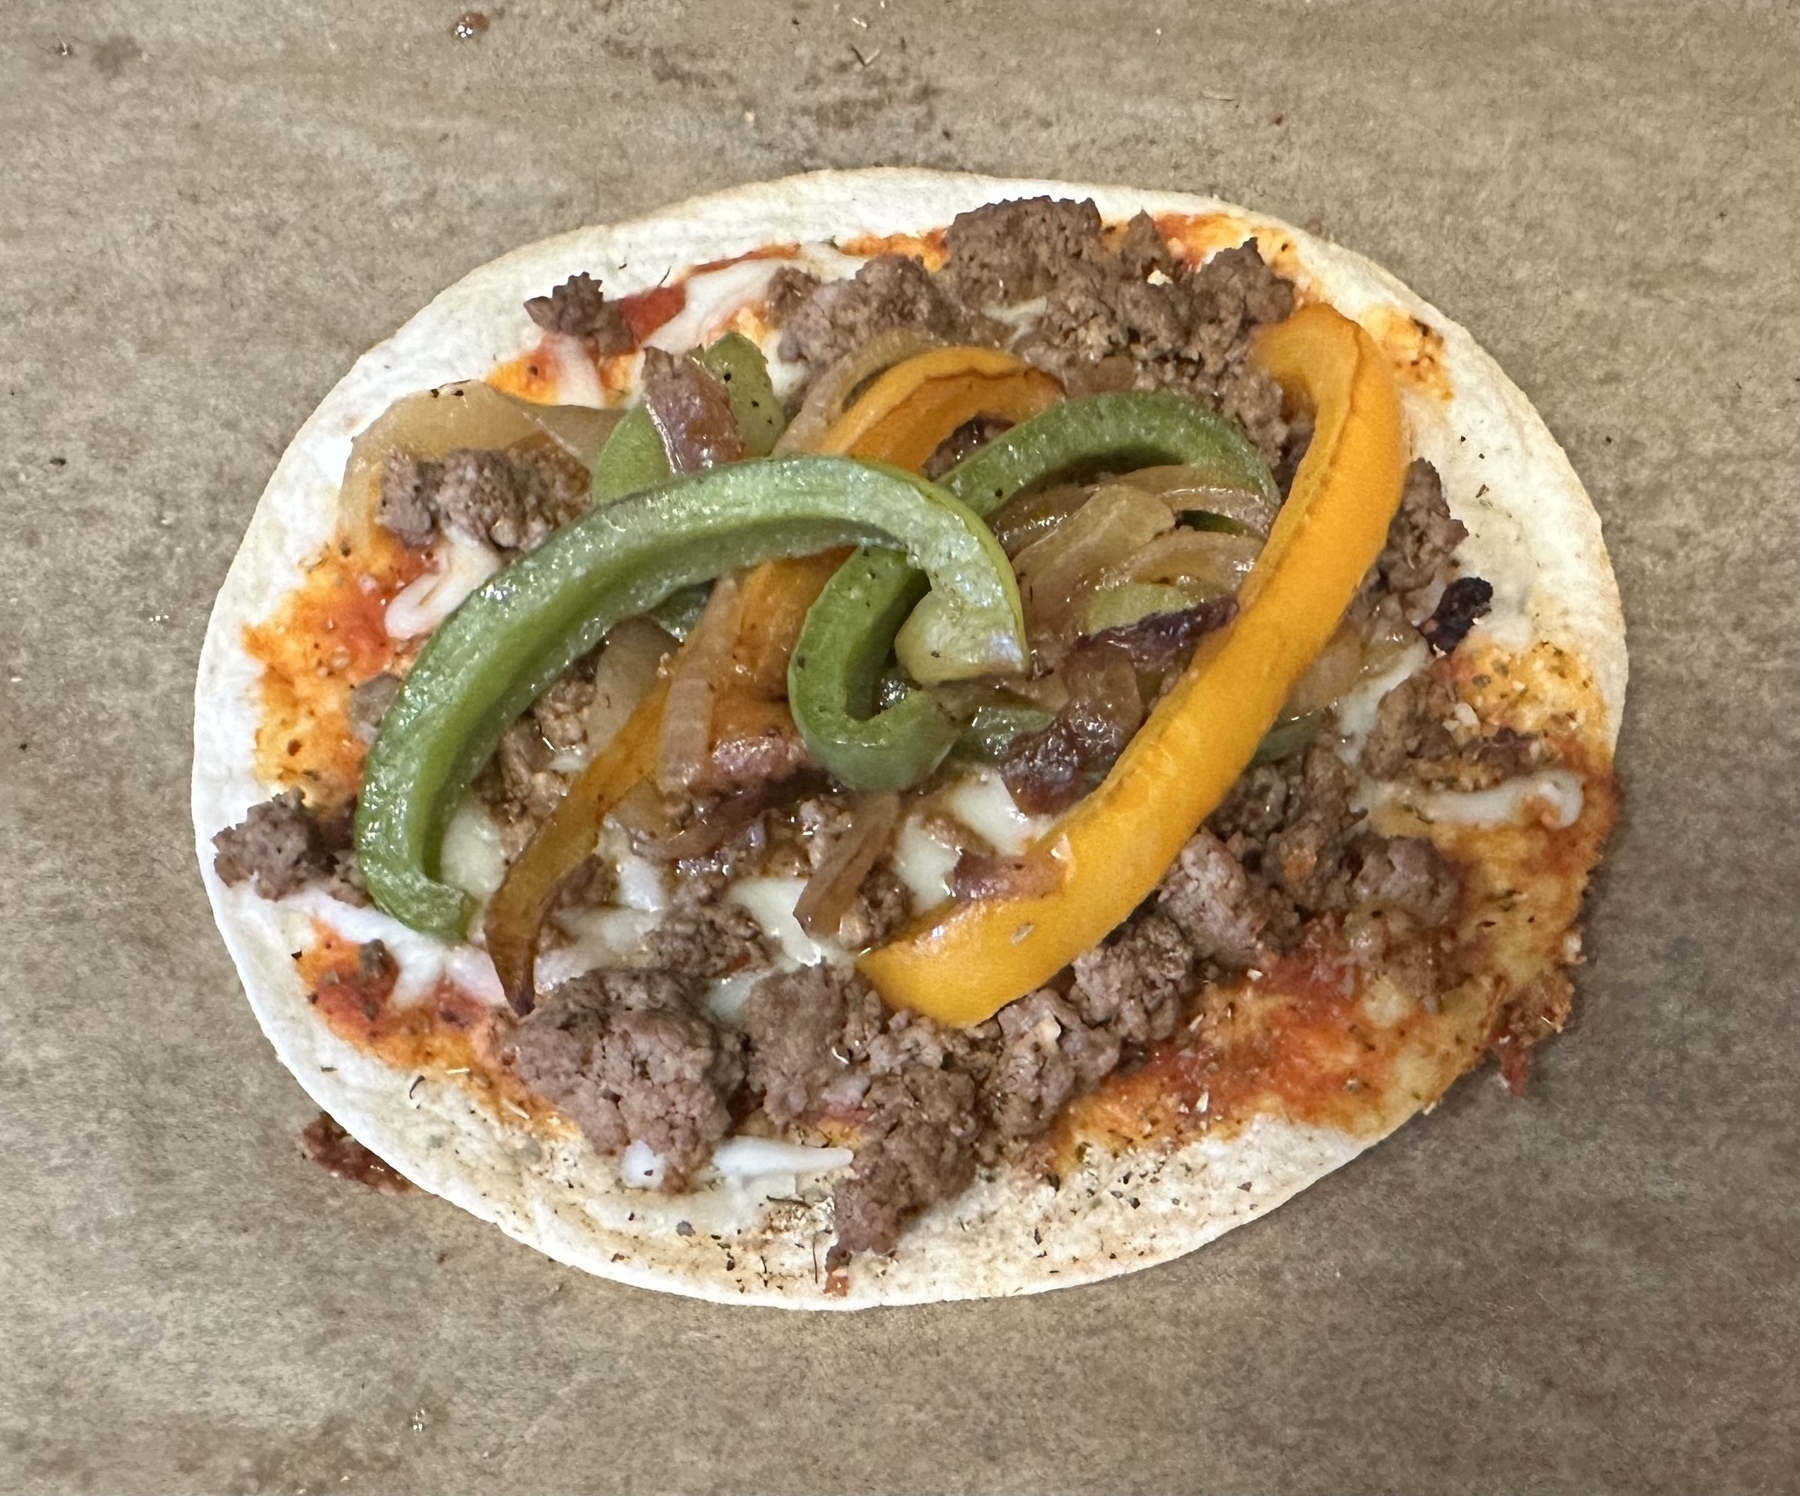 A cooked tortilla pizza topped with ground beef, veggies, and cheese.